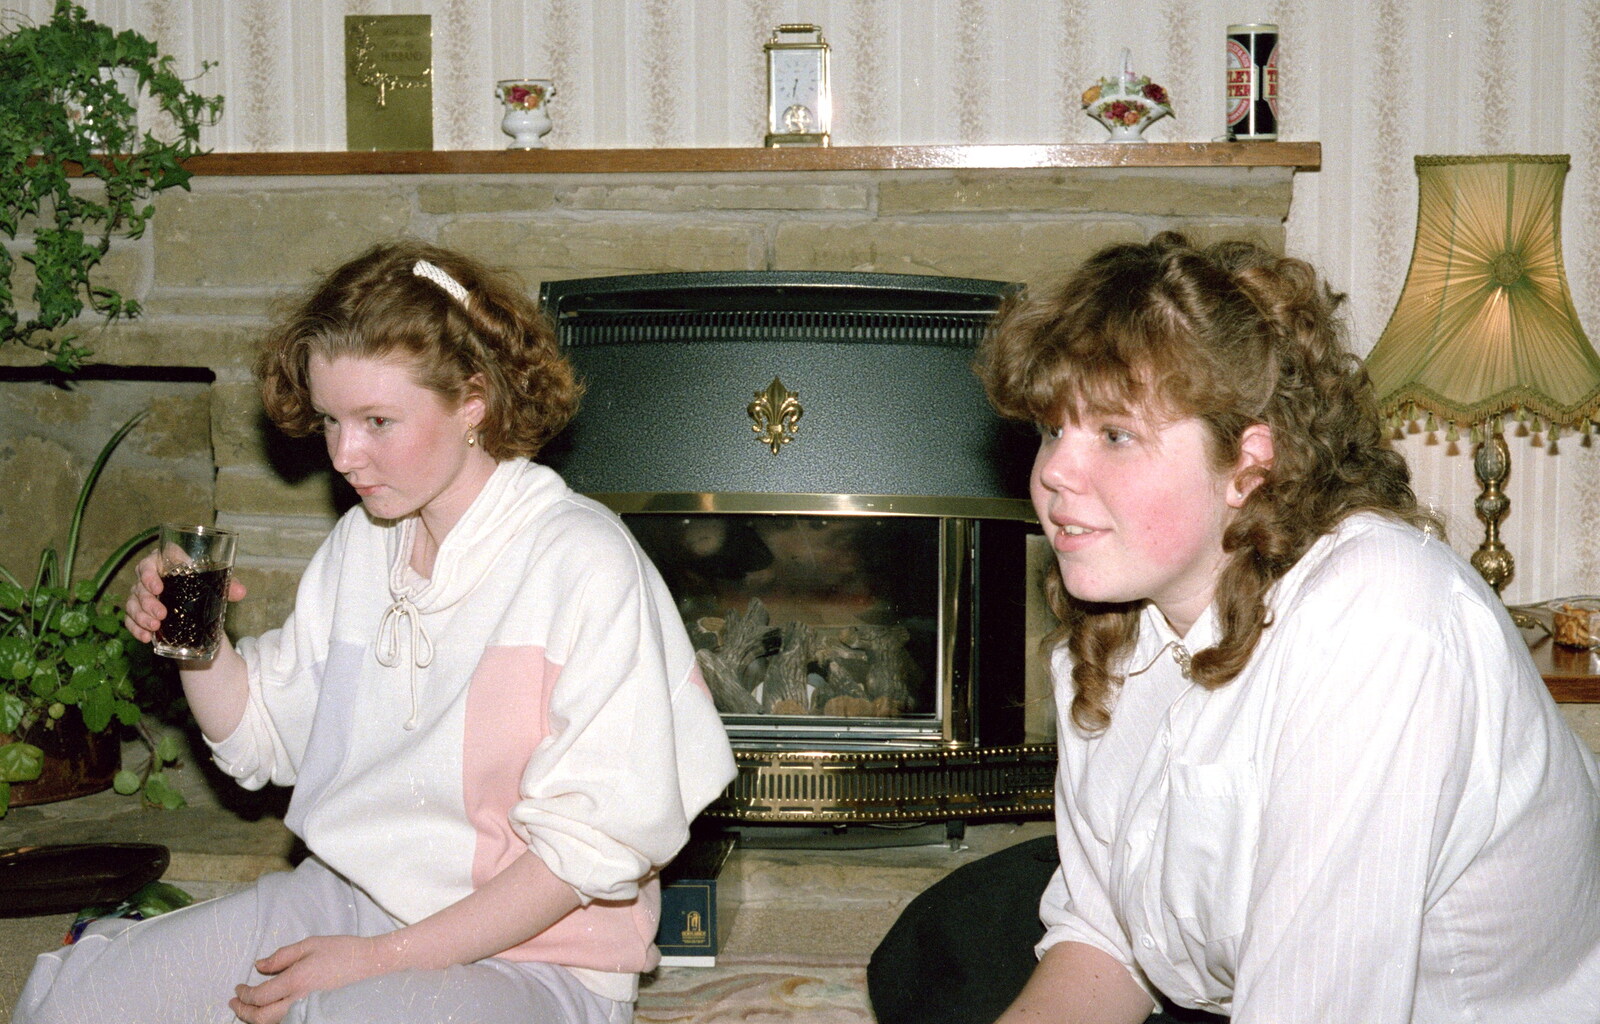 Sis with a cousin from Christmas in Macclesfield and Wetherby, Cheshire  and Yorkshire - 25th December 1985